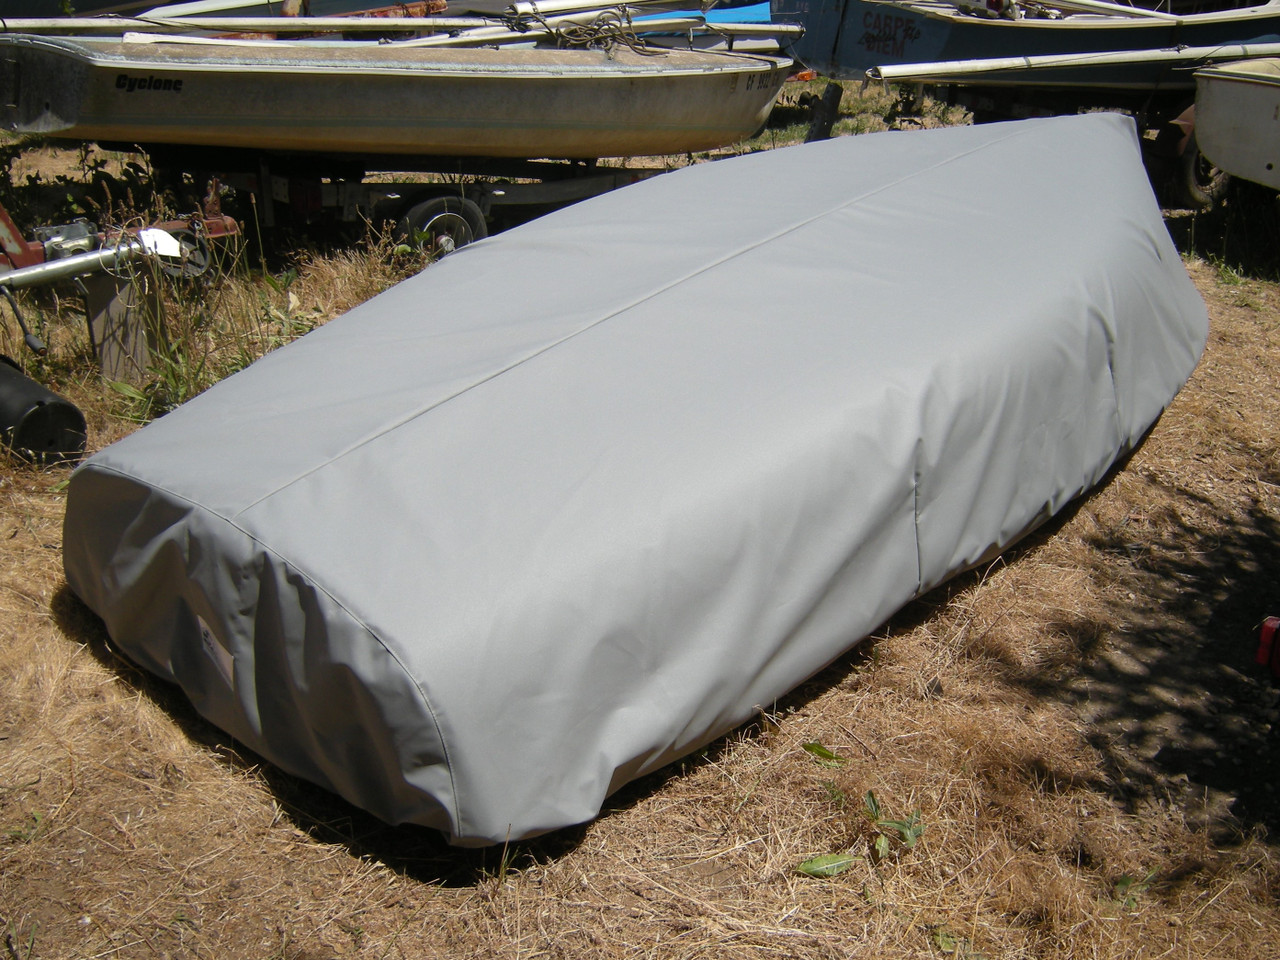 Bottom Hull Cover for a Coronado 15 sailing dinghy sailboat made in the USA by SLO Sail and Canvas. 